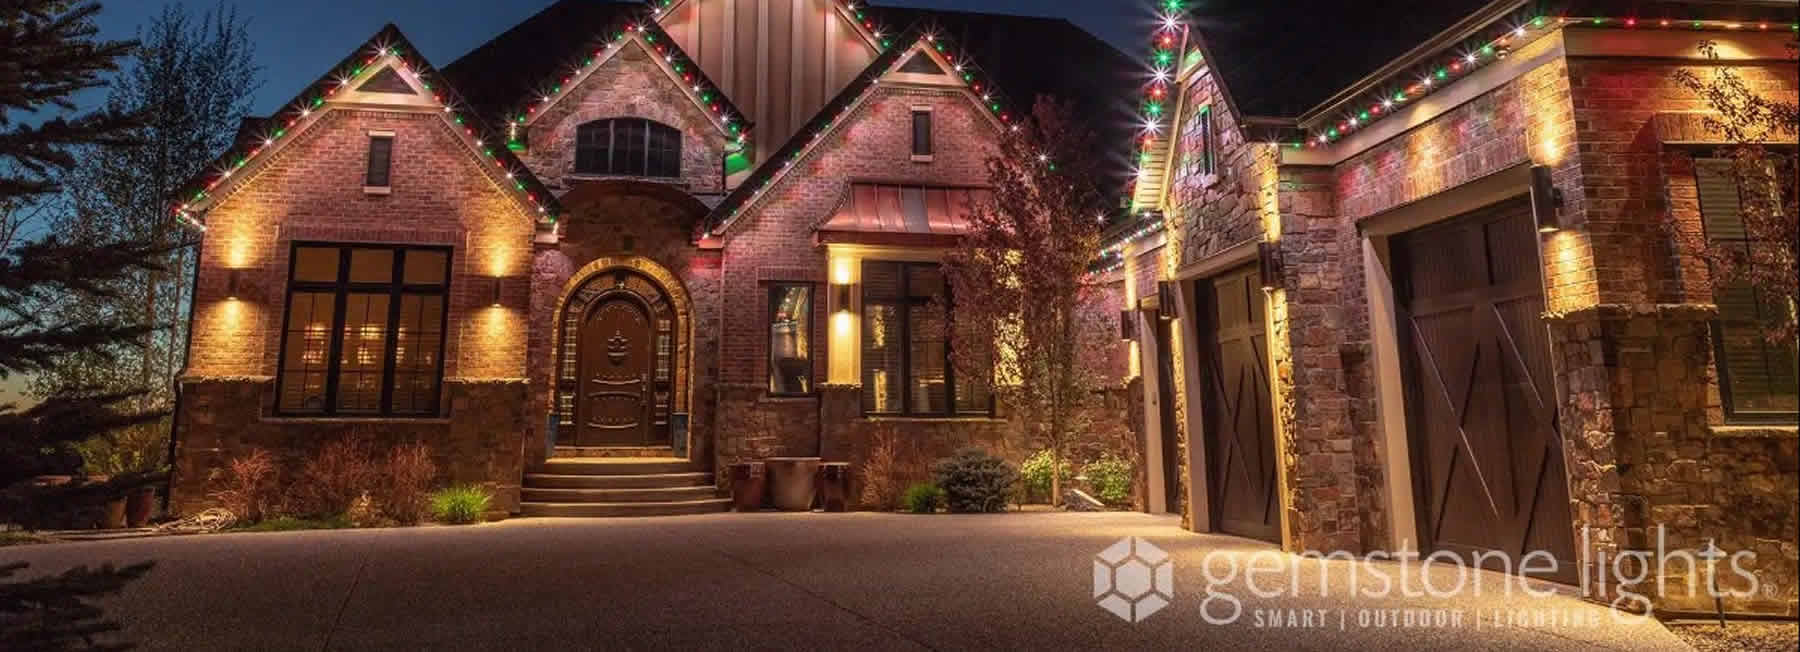 Outdoor Year Round lighting installed by Zitzow Electric of Vergas, Minnesota.